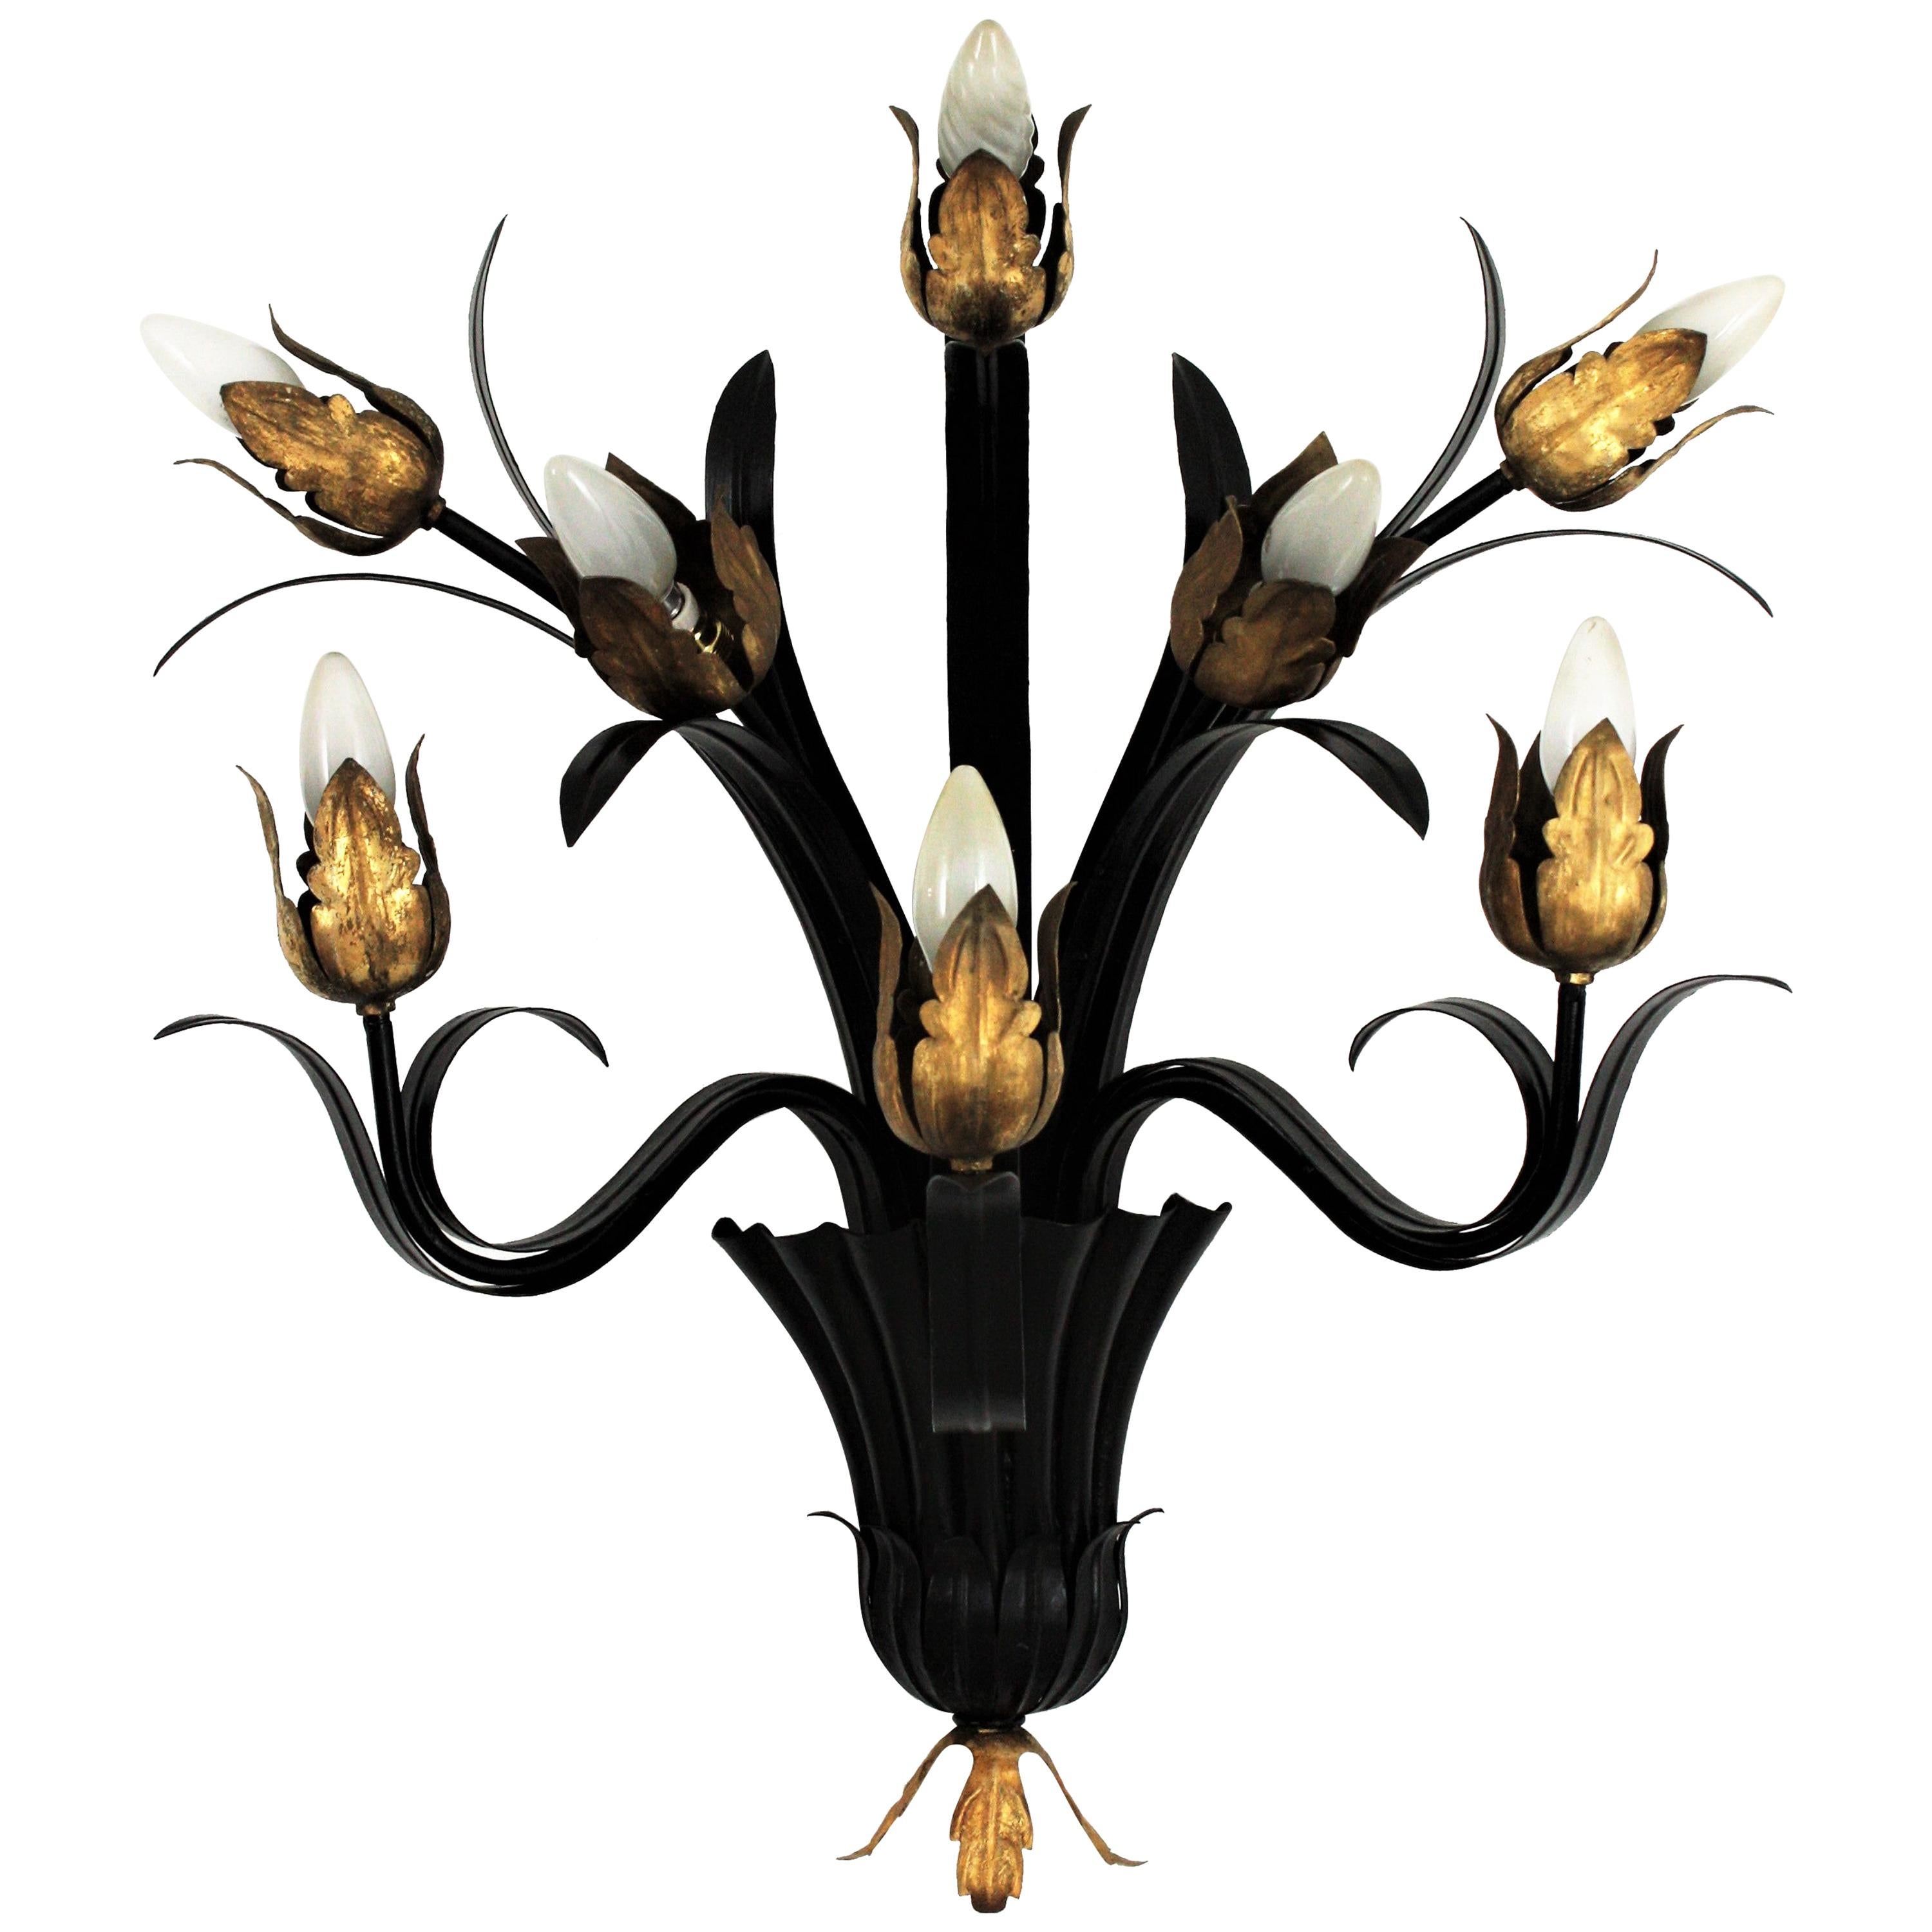 Huge Foliage Floral Wall Sconce in Black and Gilt Iron, 1950s